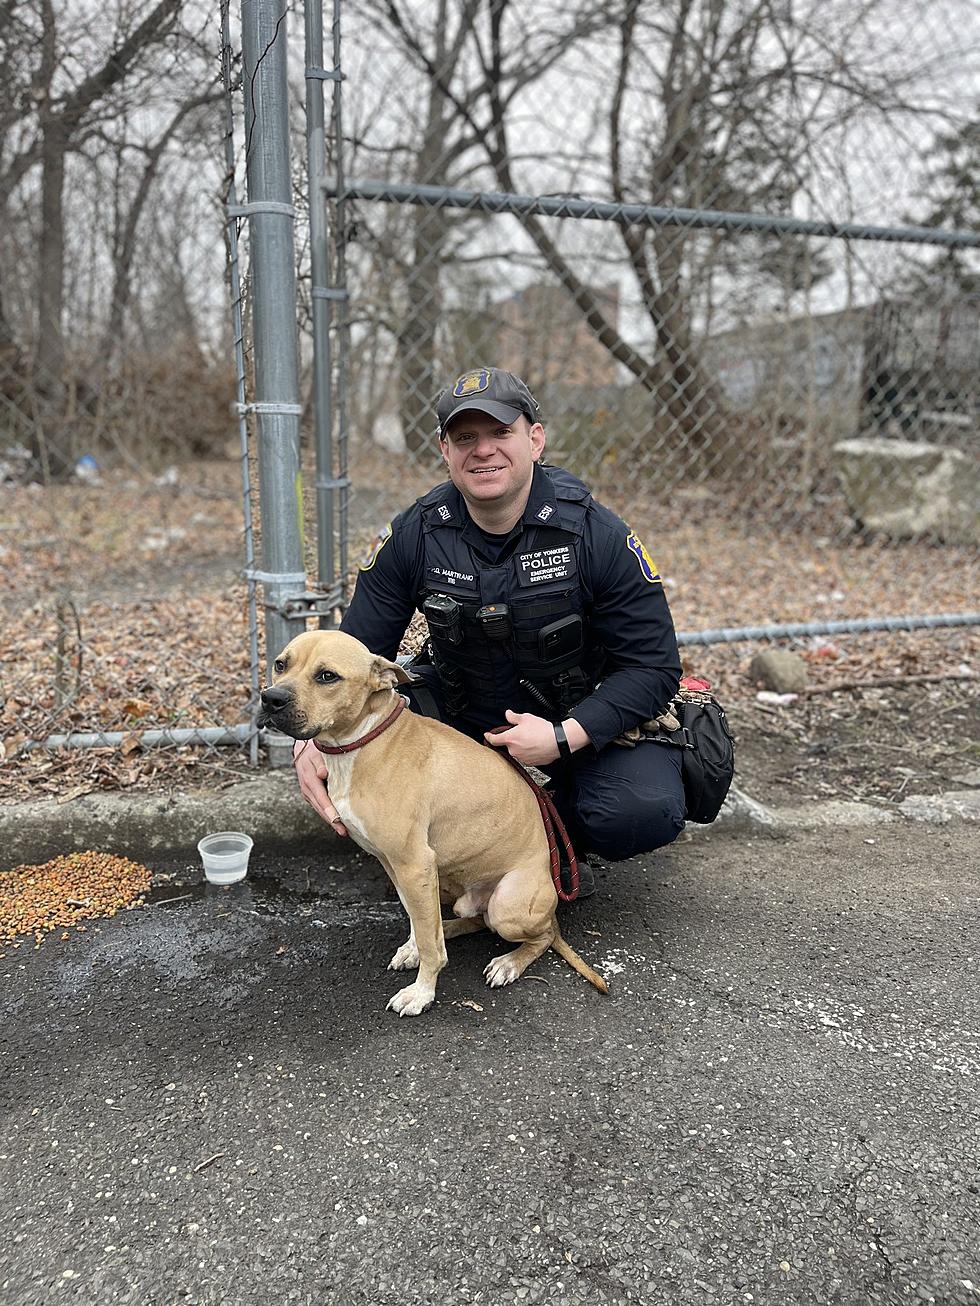 Police in Lower Hudson Valley Rescue Dogs, Including One Tied to Tree [PICS]